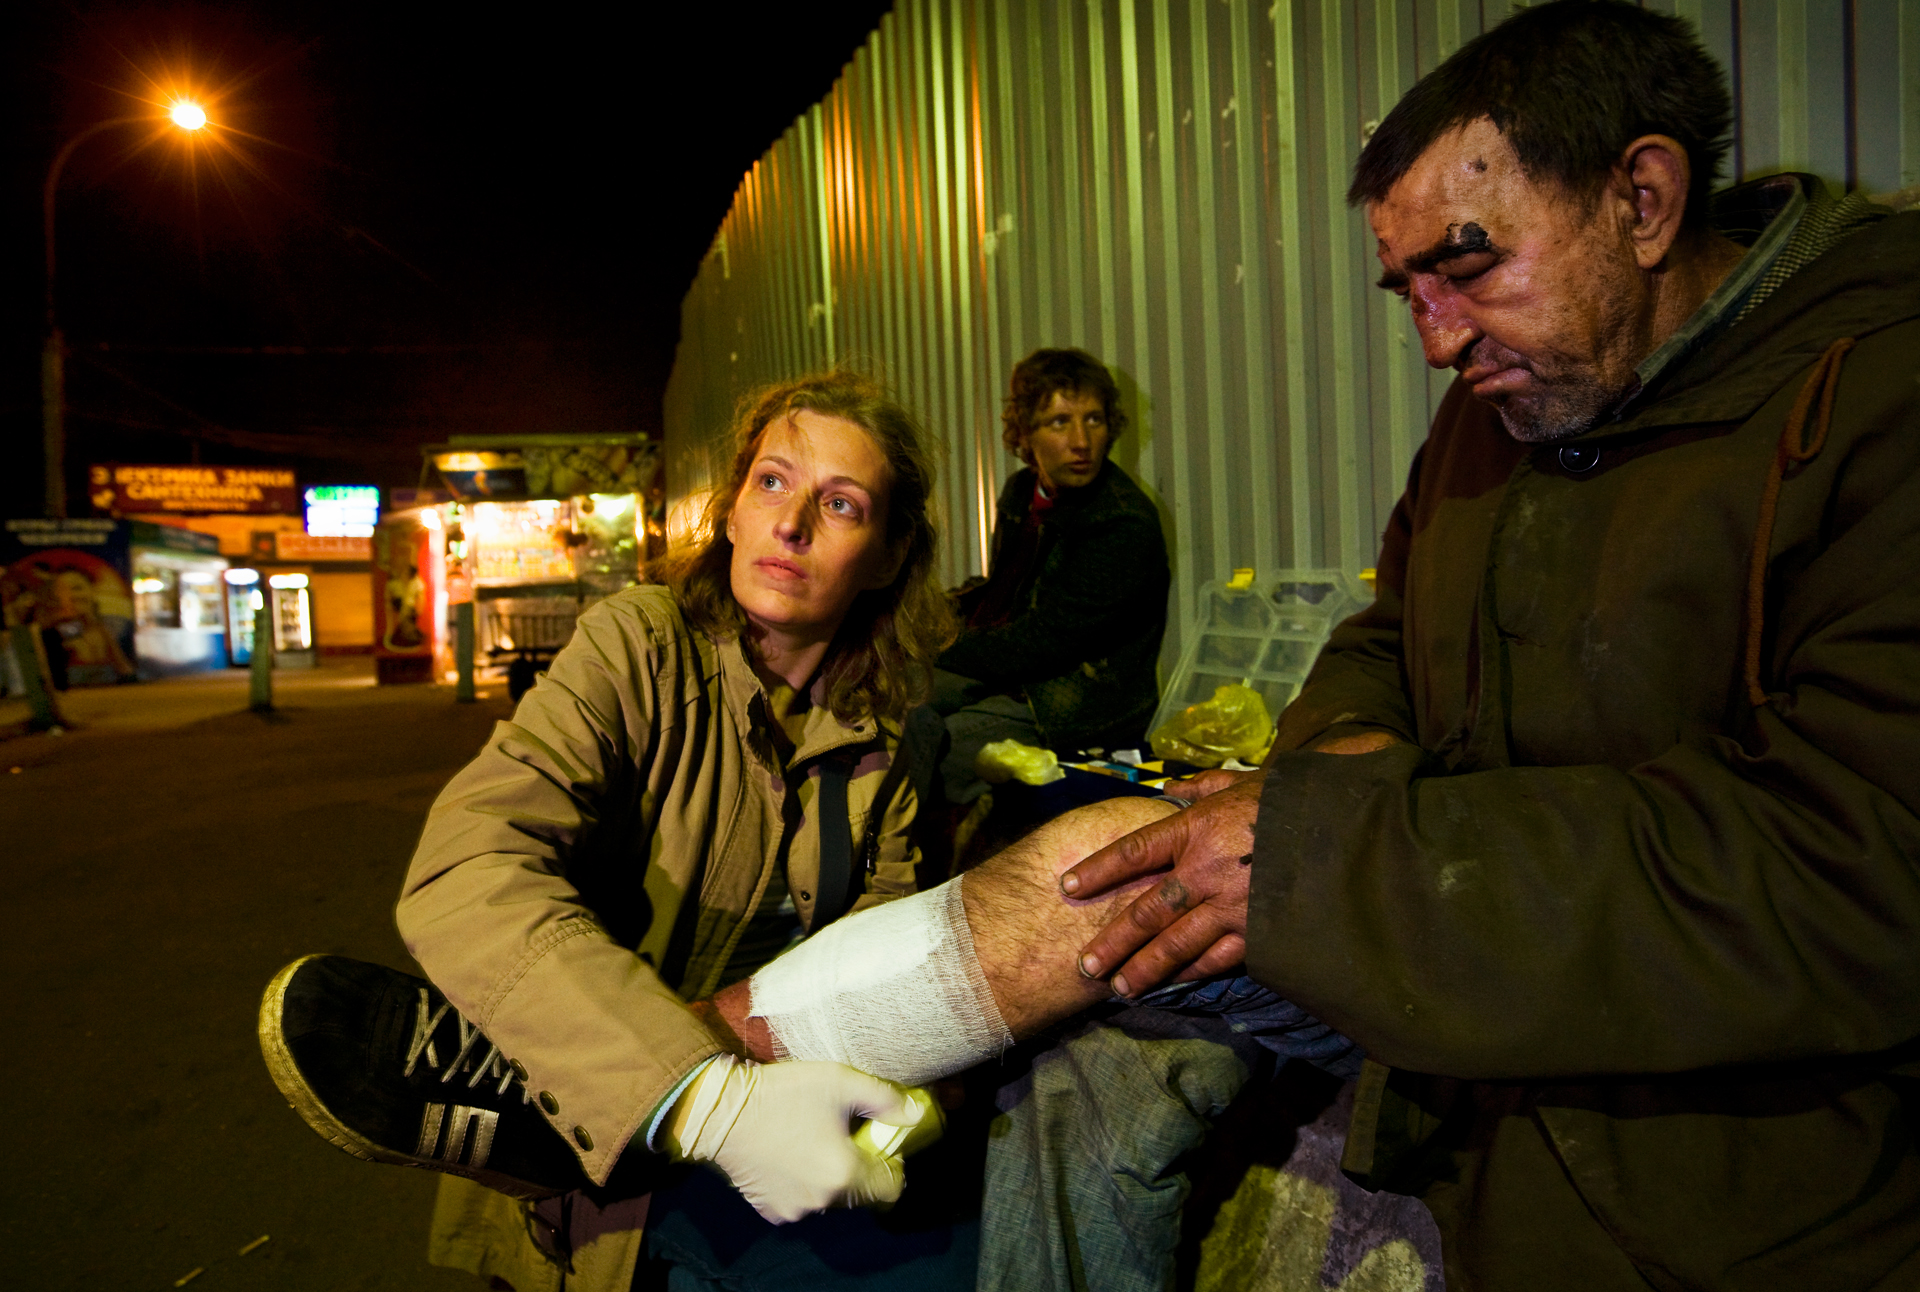  10:45PM - Angel of the night, volunteer Tatyana Sveshnikova, attends to a battered homeless man near Kursk Station with aid collected from personal friends and family. 